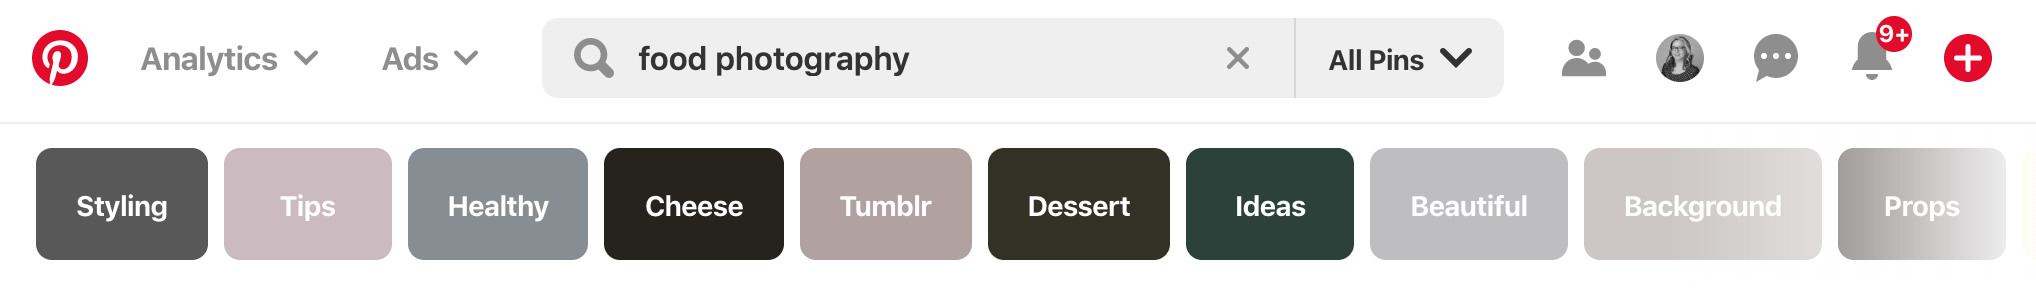 Pinterest suggestions of relevant terms for long-tail keywords for food photography